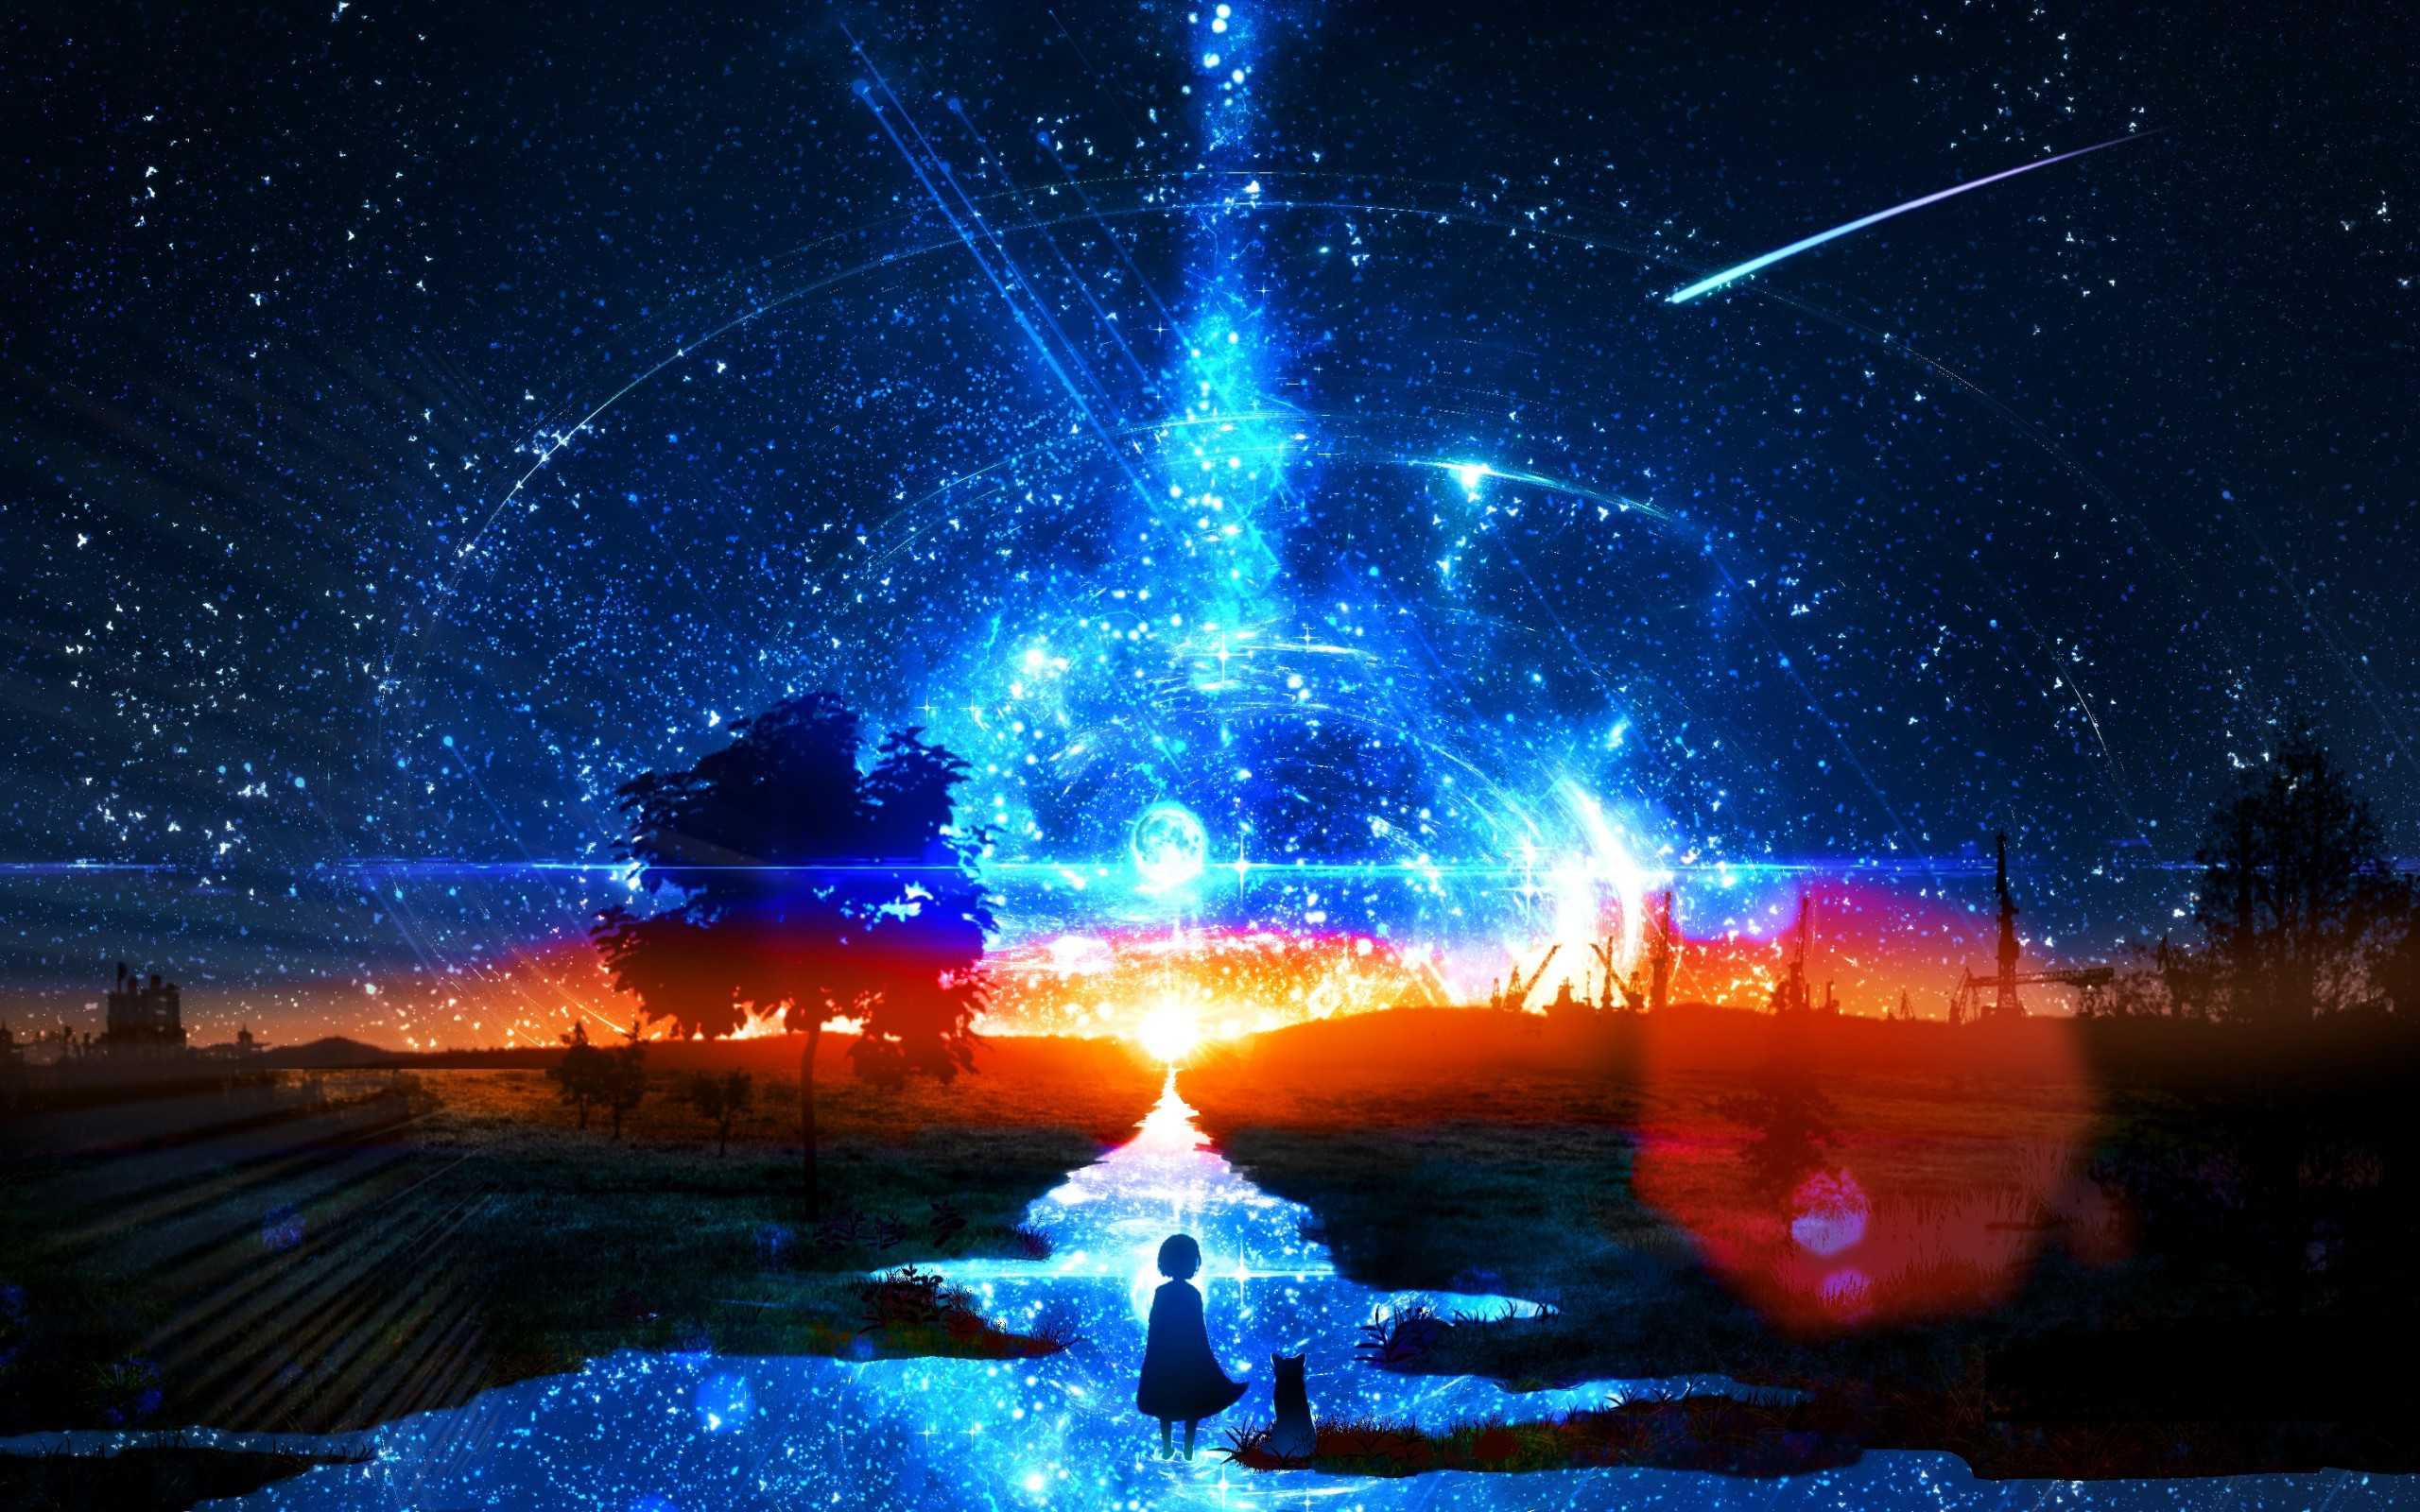 Download 2560x1600 Anime Landscape, Shooting Stars, Comet, Anime Girl, Cat, Scenery, Night Wallpaper for MacBook Pro 13 inch